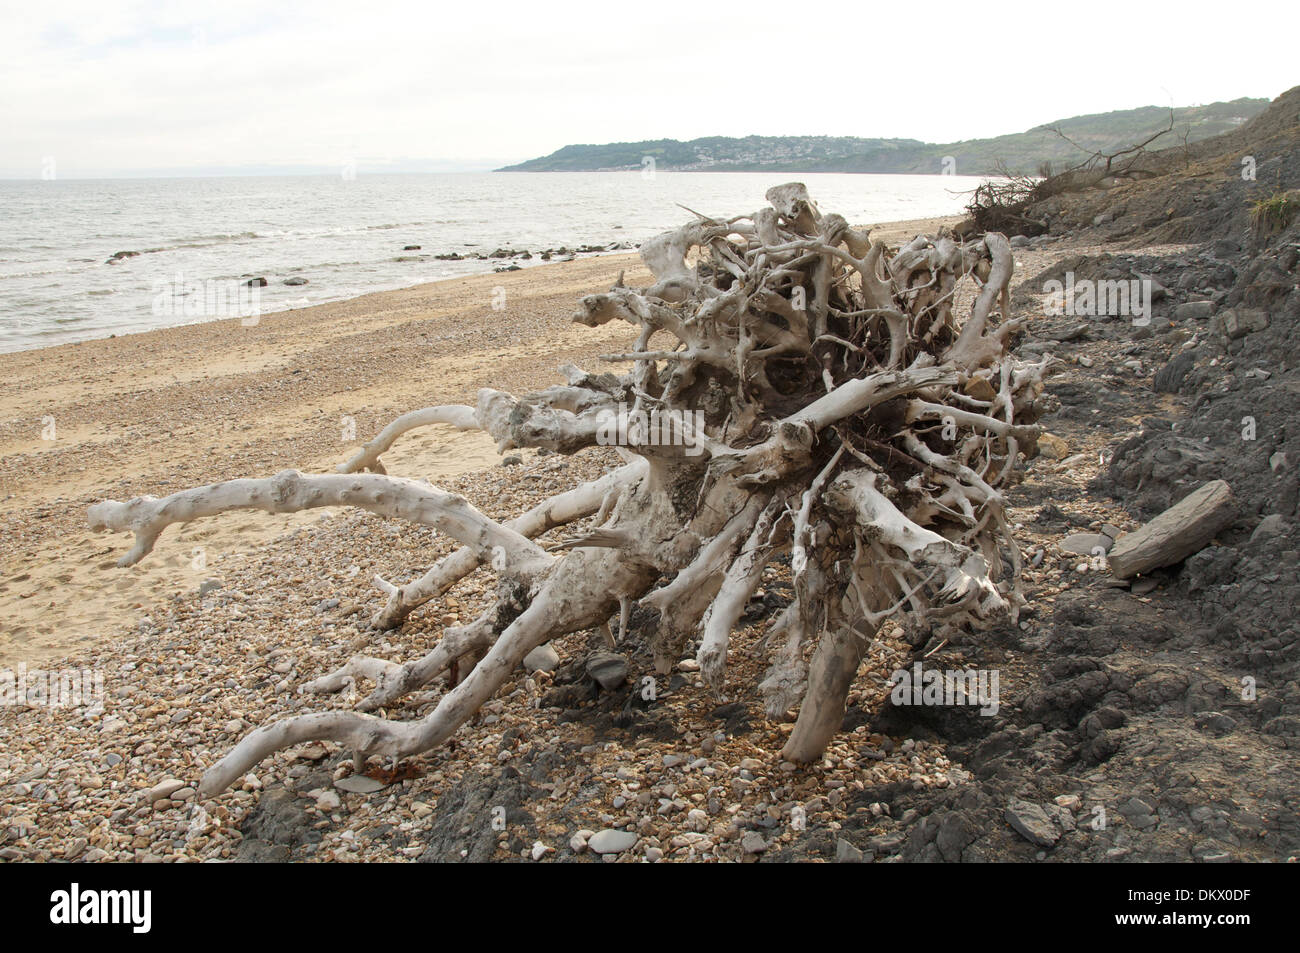 Driftwood. A clump of tree roots, debris from a landslide, washed up on the beach at Charmouth. The Jurassic Coast, Dorset. England, United Kingdom. Stock Photo